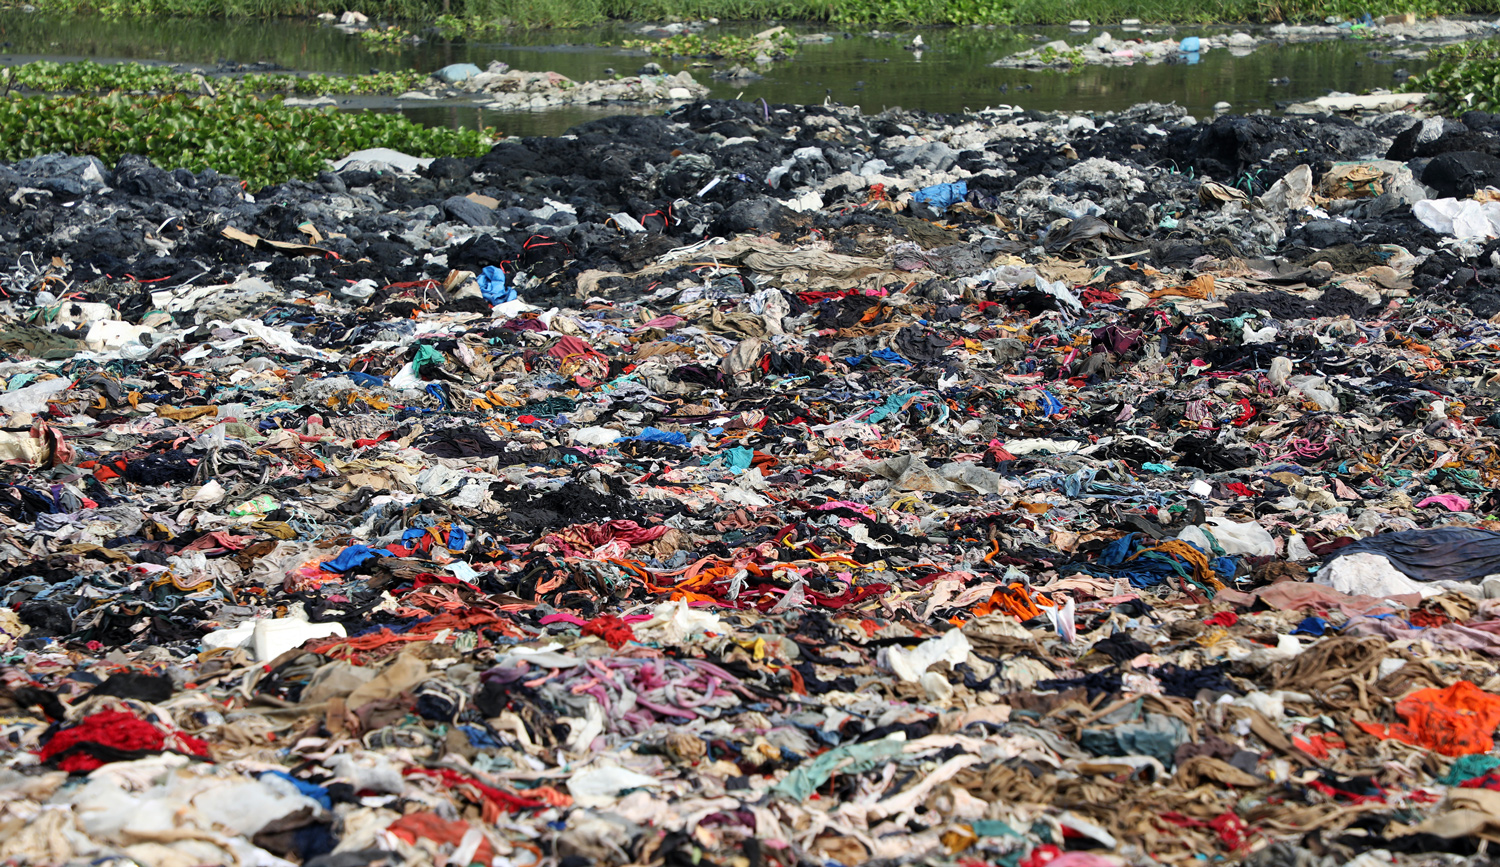 A large amount of textiles in many colors are scattered on land and in water.